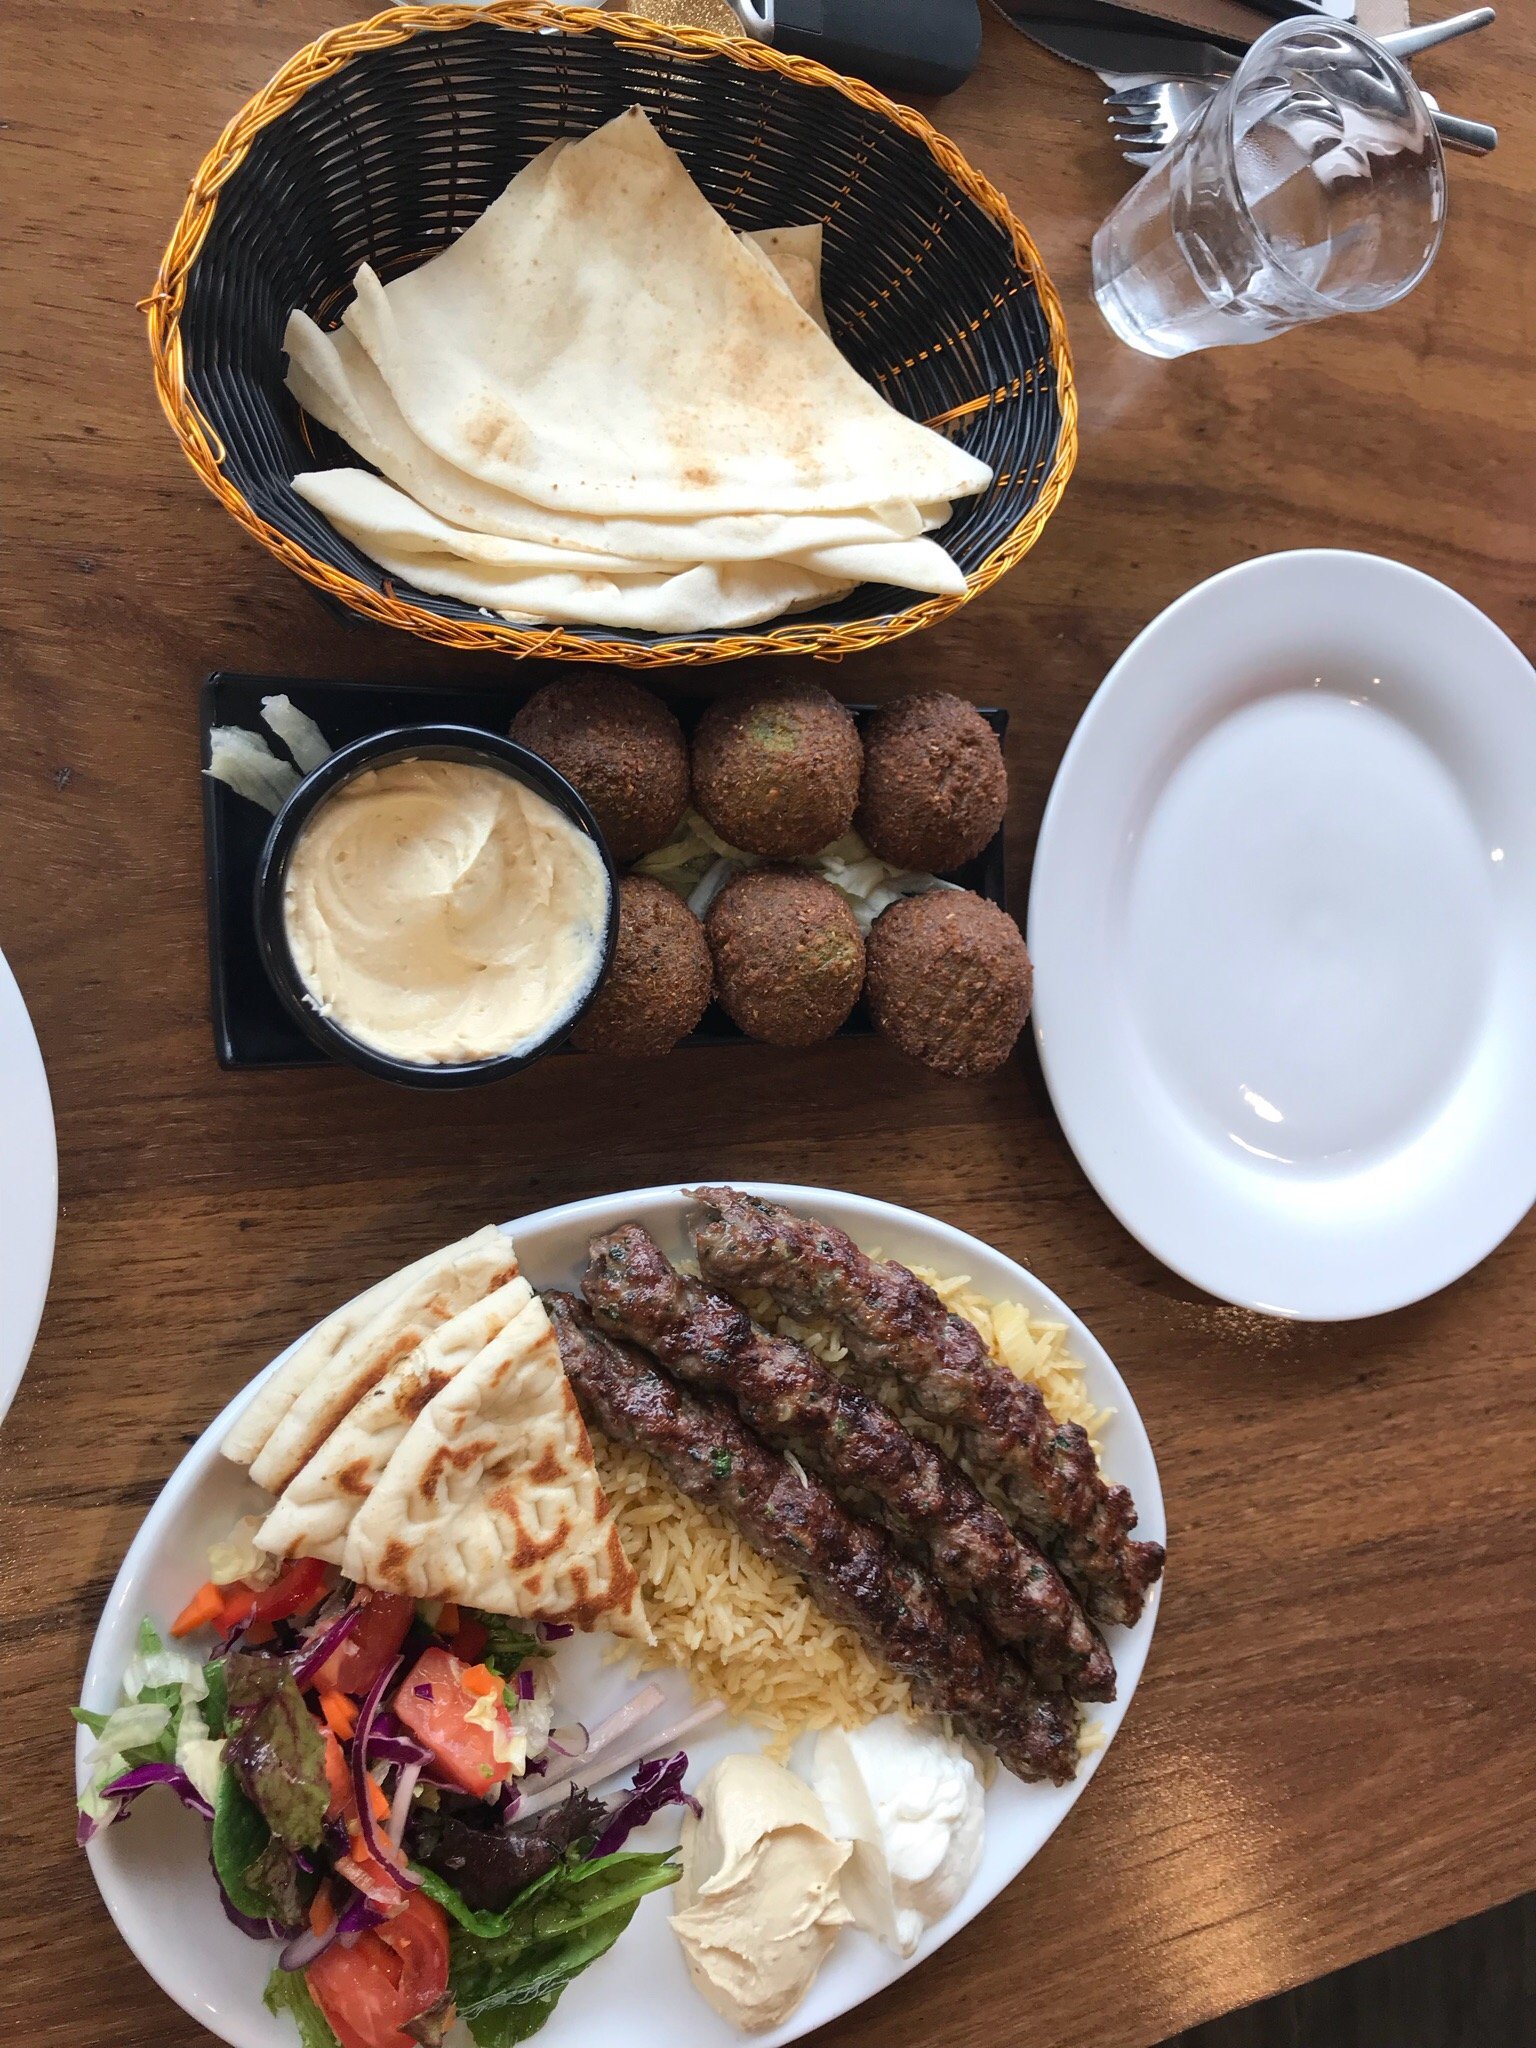 Arabella's Charcoal And Middle Eastern Cuisine - thumb 1